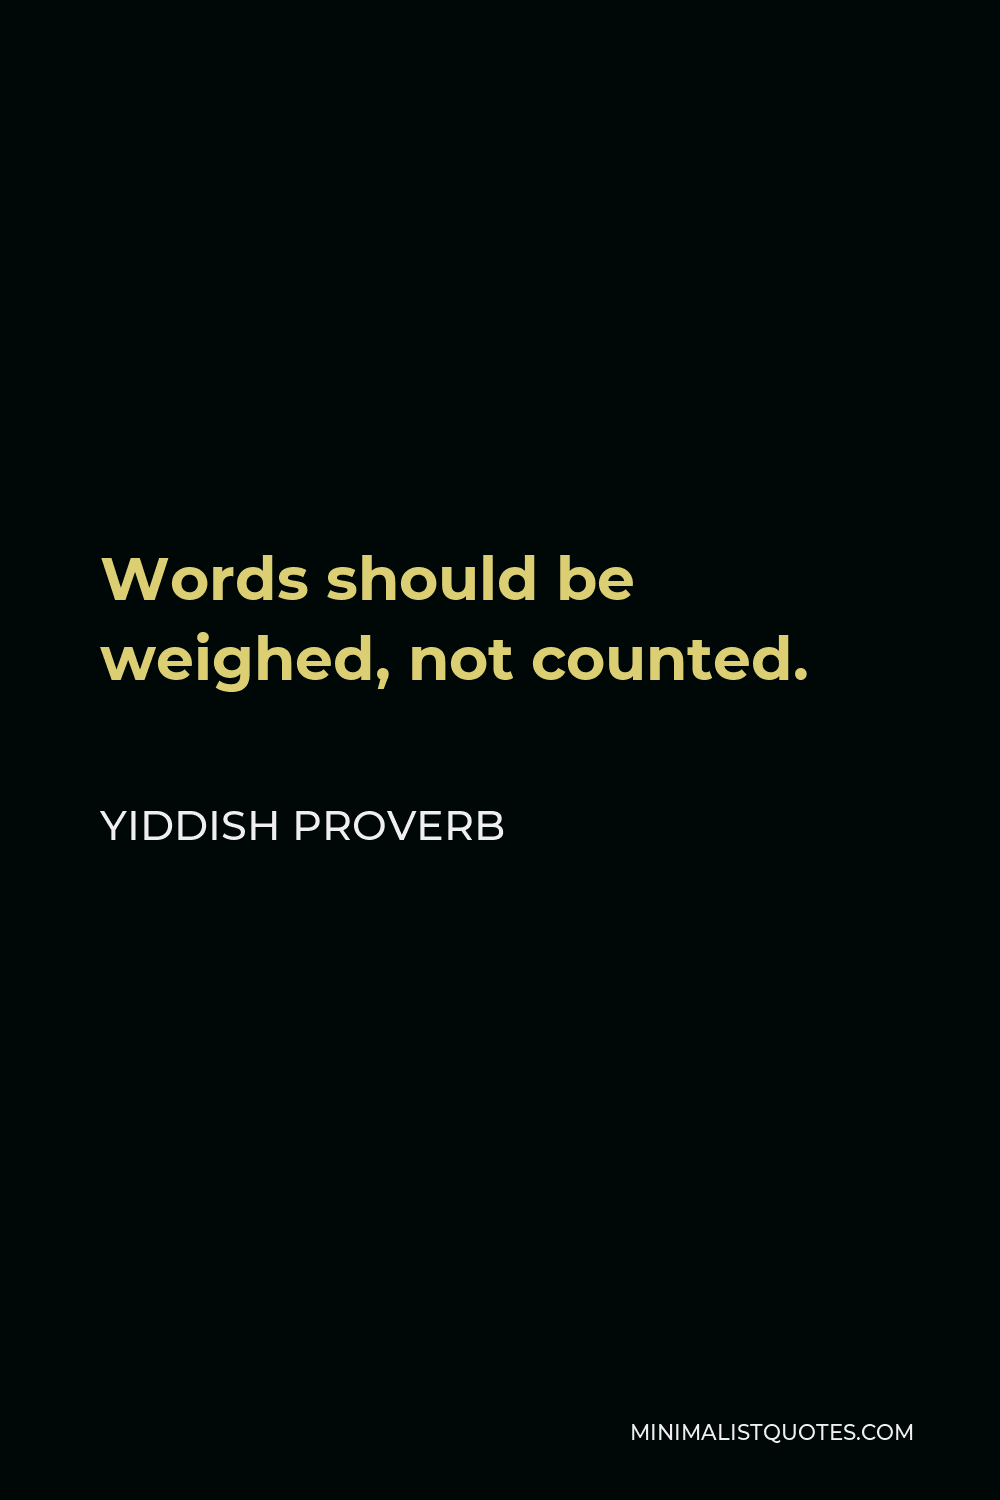 Yiddish Proverb Quote - Words should be weighed, not counted.